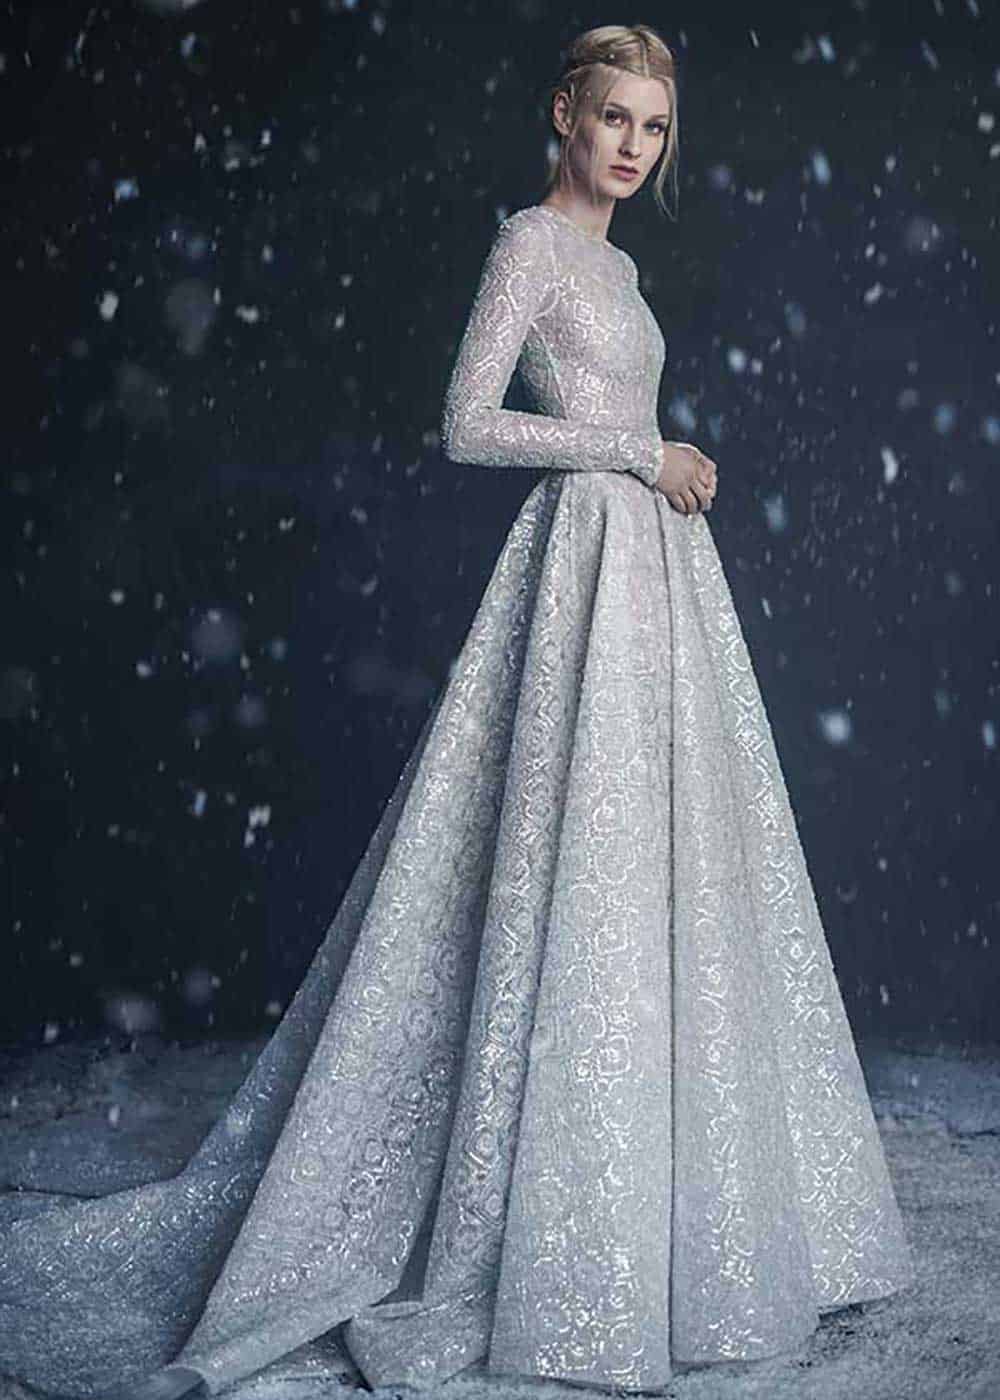 Paolo Sebastian platinum full skirted ball gown with sleeves and pockets, full-beaded lace embellishment and train from his 2016 autumn/winter couture collection. 